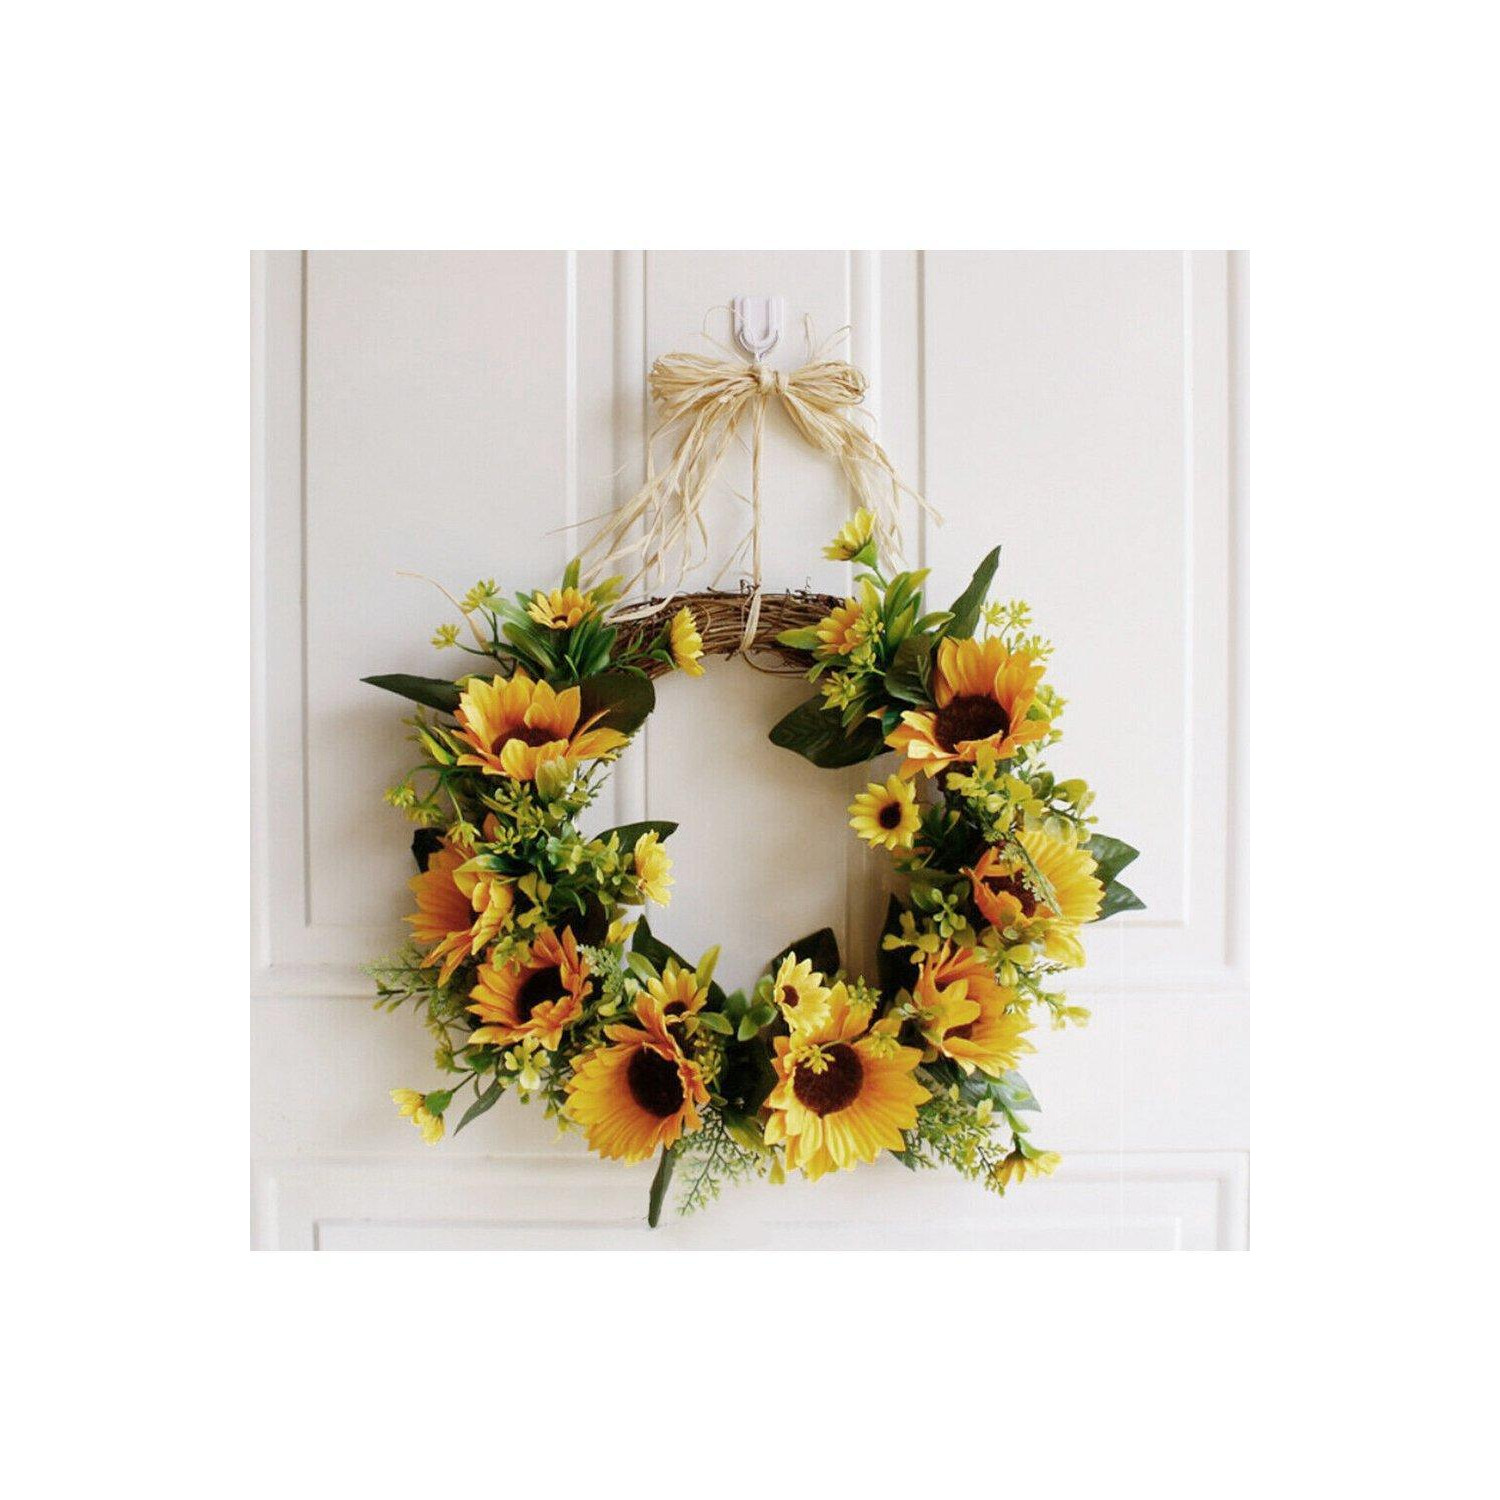 Artificial Sunflower Wreath Hanging Garland for Wedding Decoration - image 1